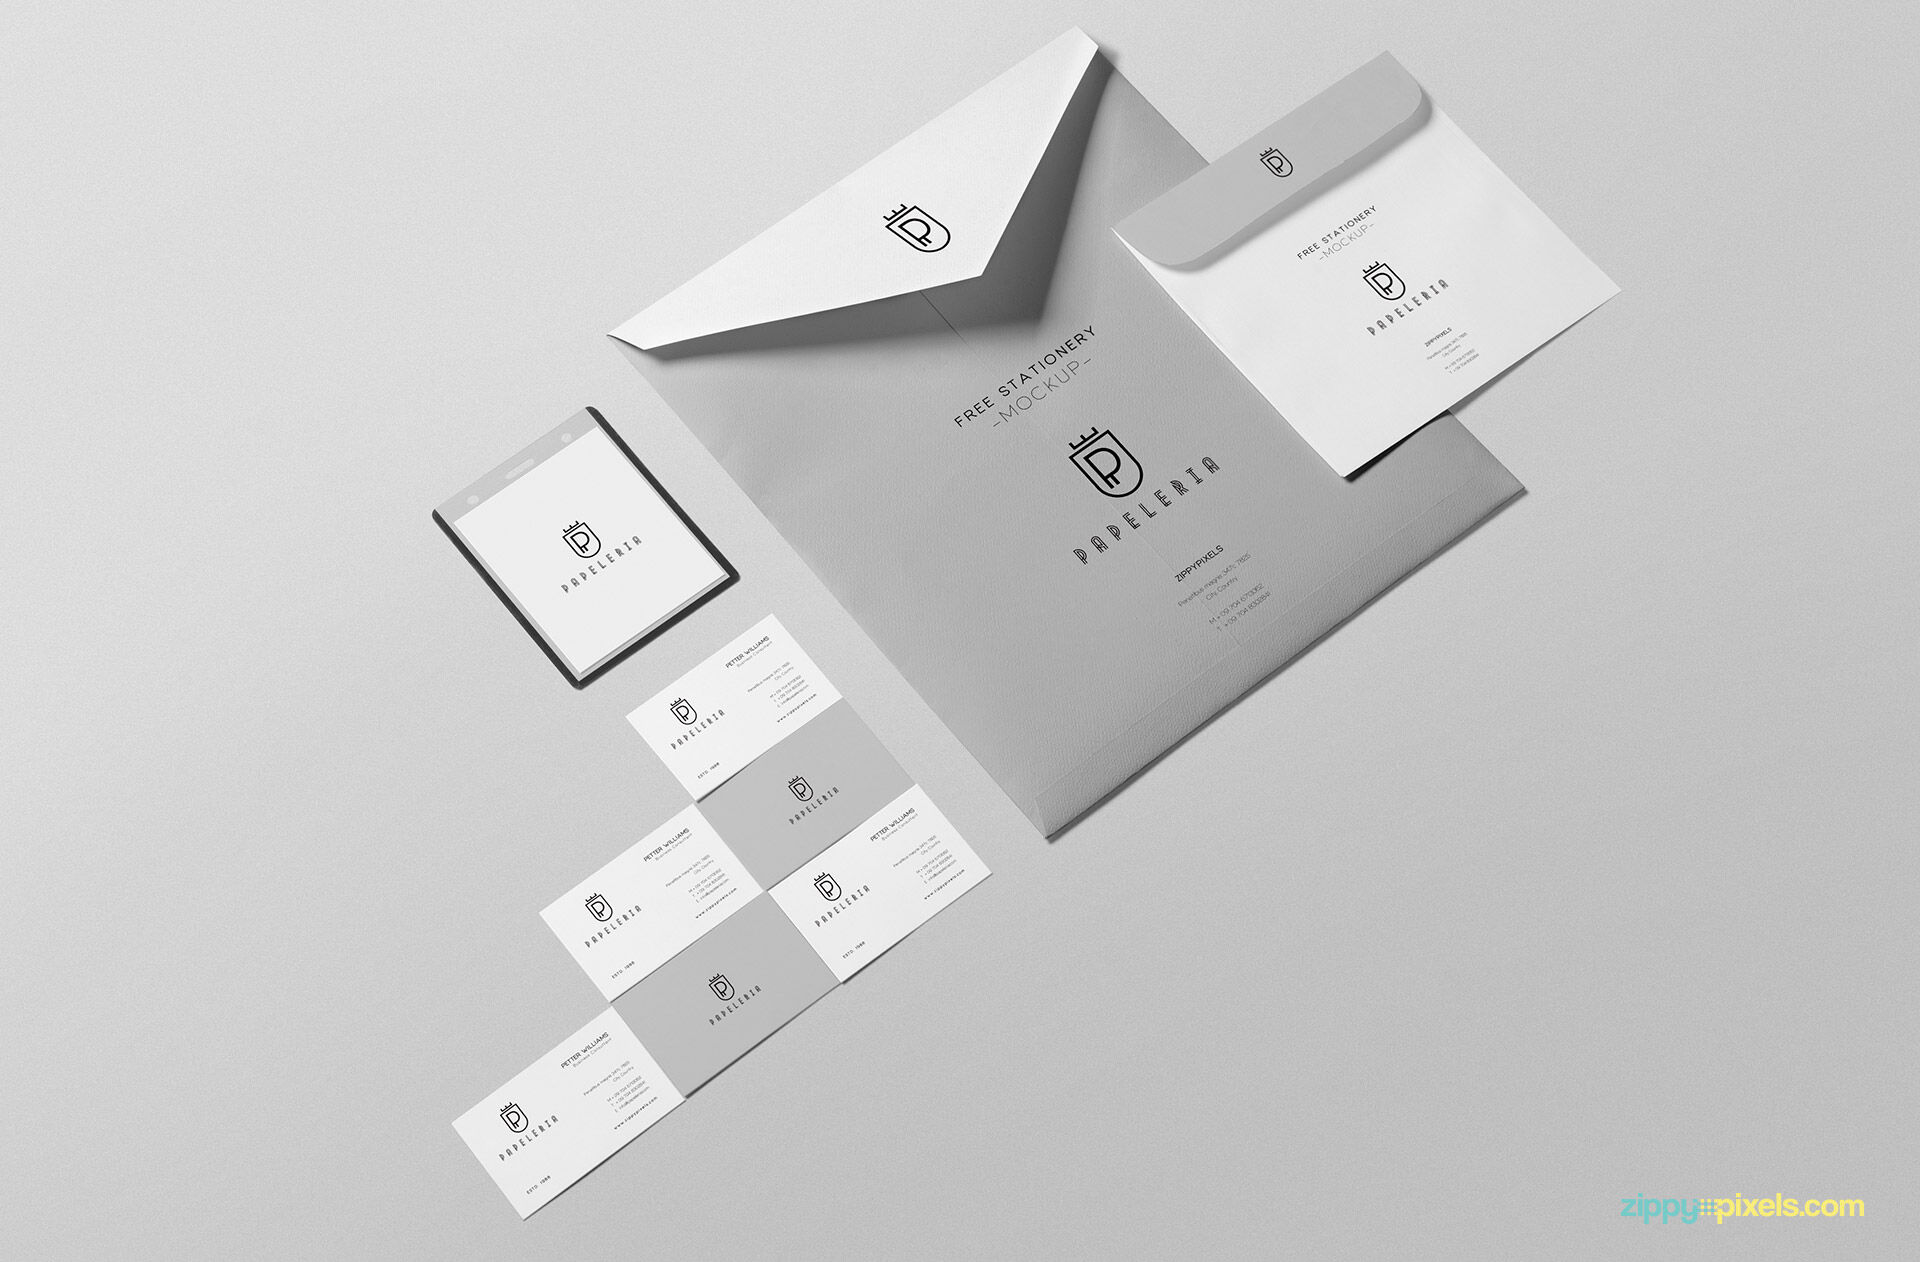 Mockup Featuring 2 Envelopes, 6 Business Cards, and ID Badge FREE PSD